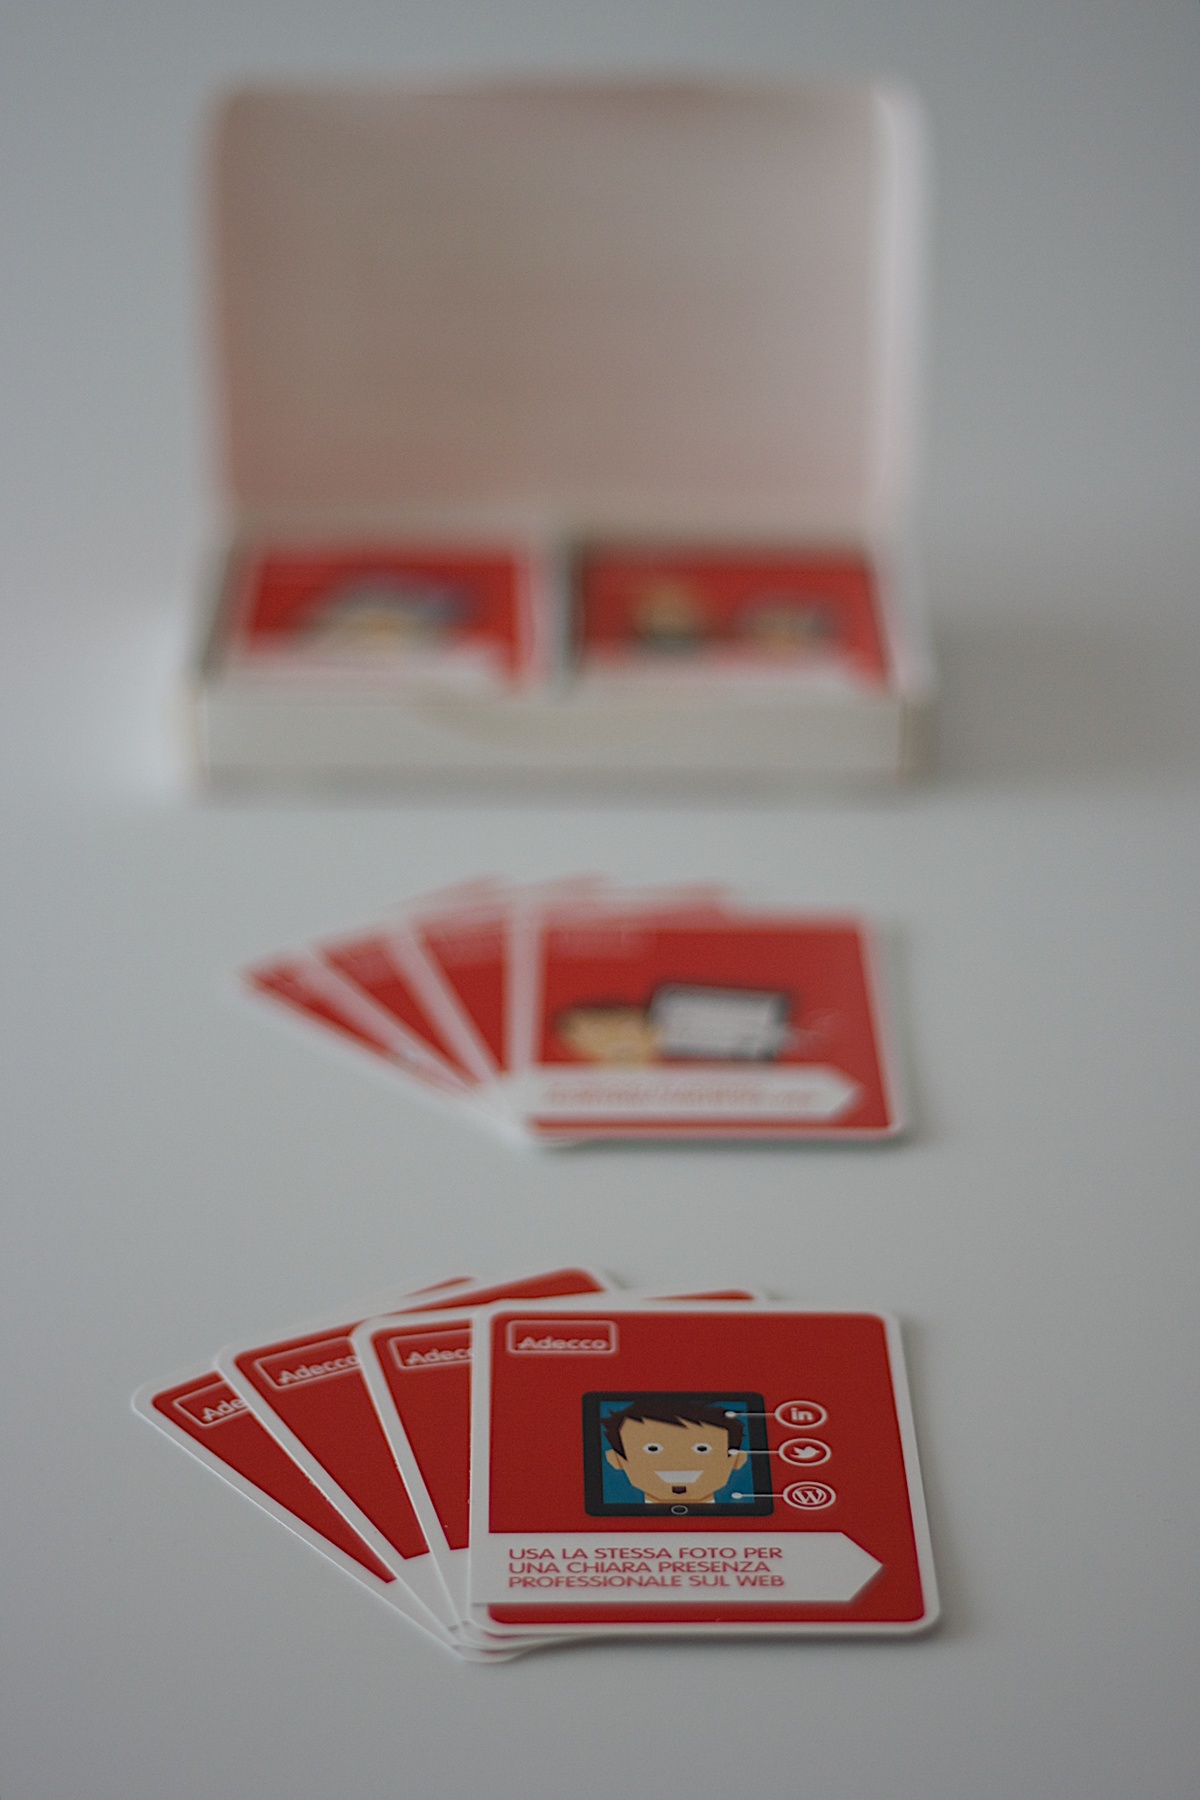 Playing Cards  invitation Event promotional material  marketing material